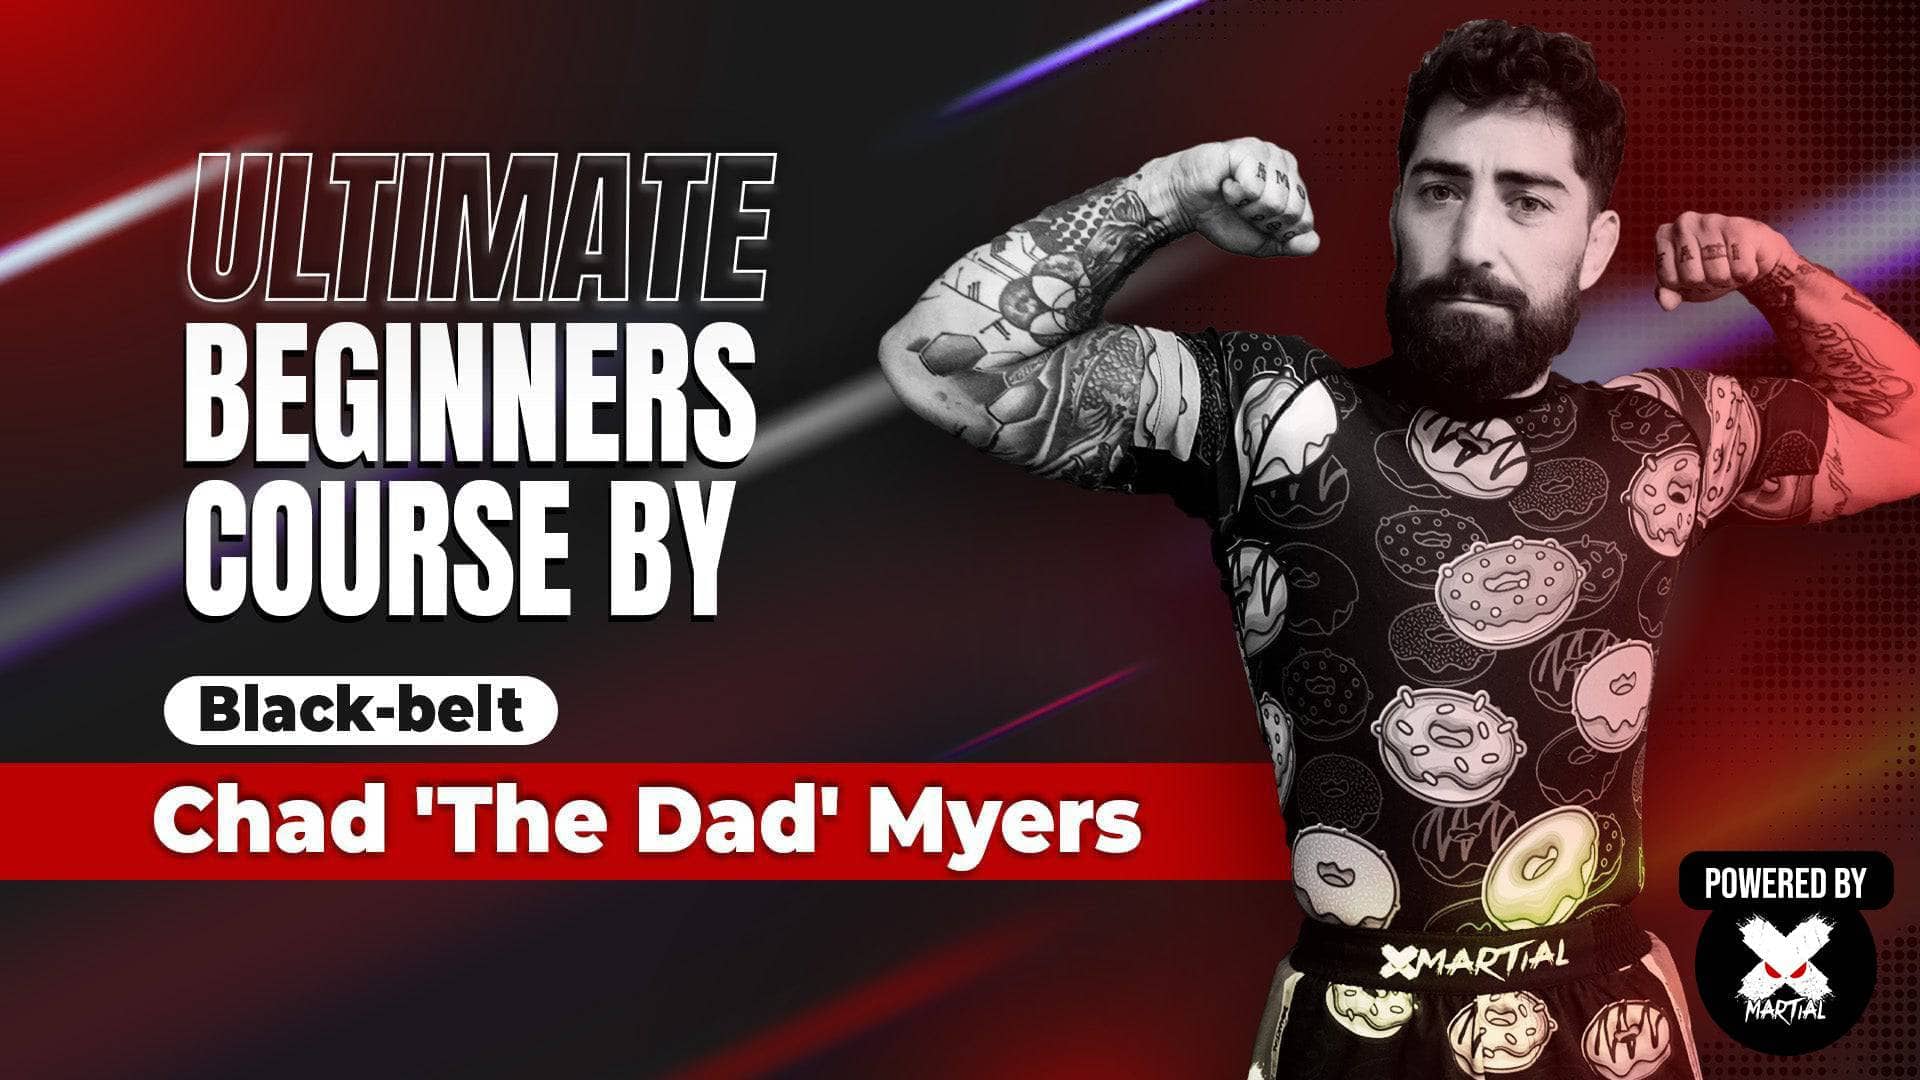 The Ultimate BJJ Beginners Course by Black-Belt Chad 'The Dad' Myers XMARTIAL